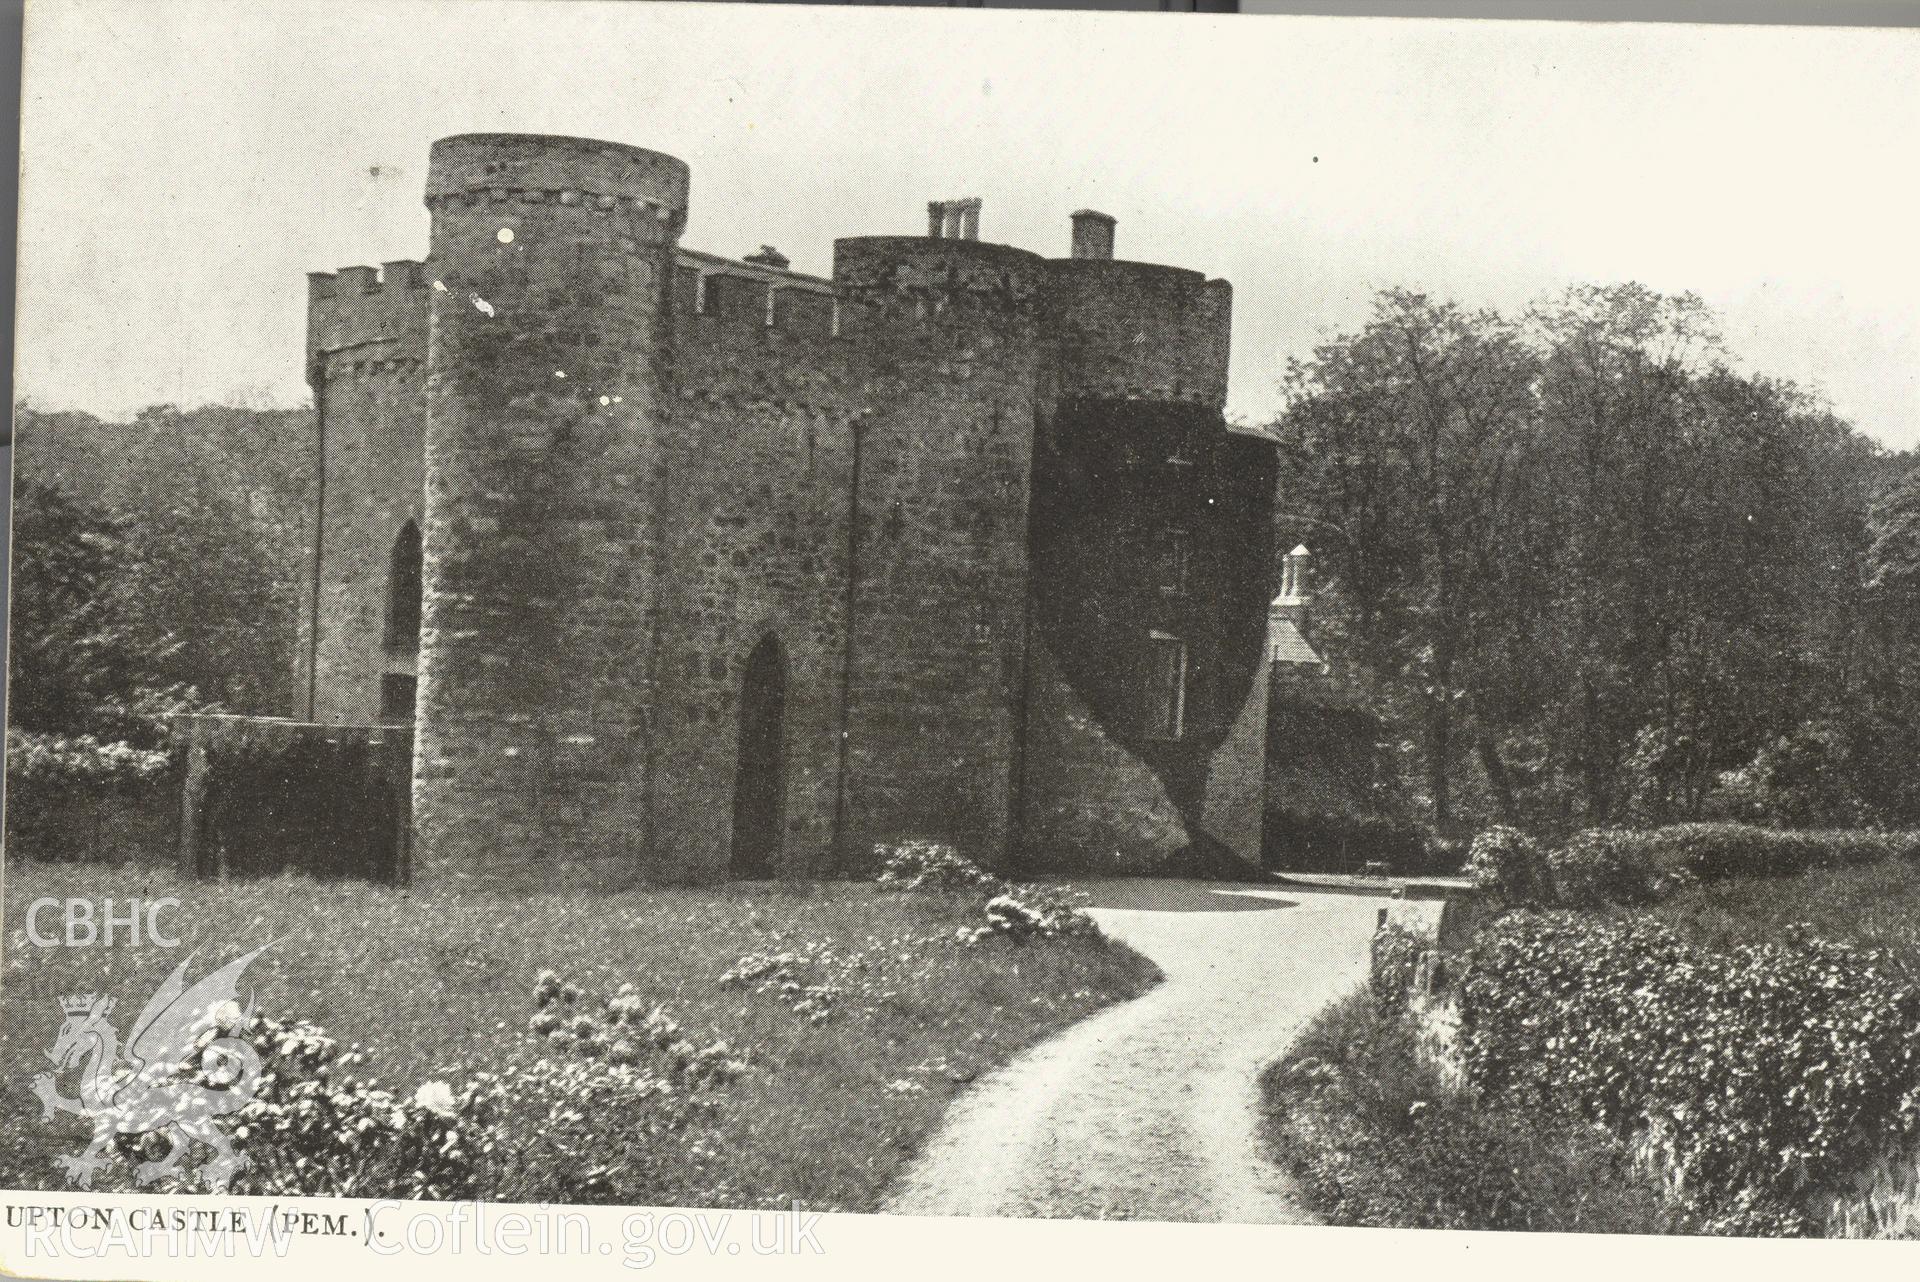 Digitised postcard image of Upton castle, Cosheston, The Dodson Series. Produced by Parks and Gardens Data Services, from an original item in the Peter Davis Collection at Parks and Gardens UK. We hold only web-resolution images of this collection, suitable for viewing on screen and for research purposes only. We do not hold the original images, or publication quality scans.